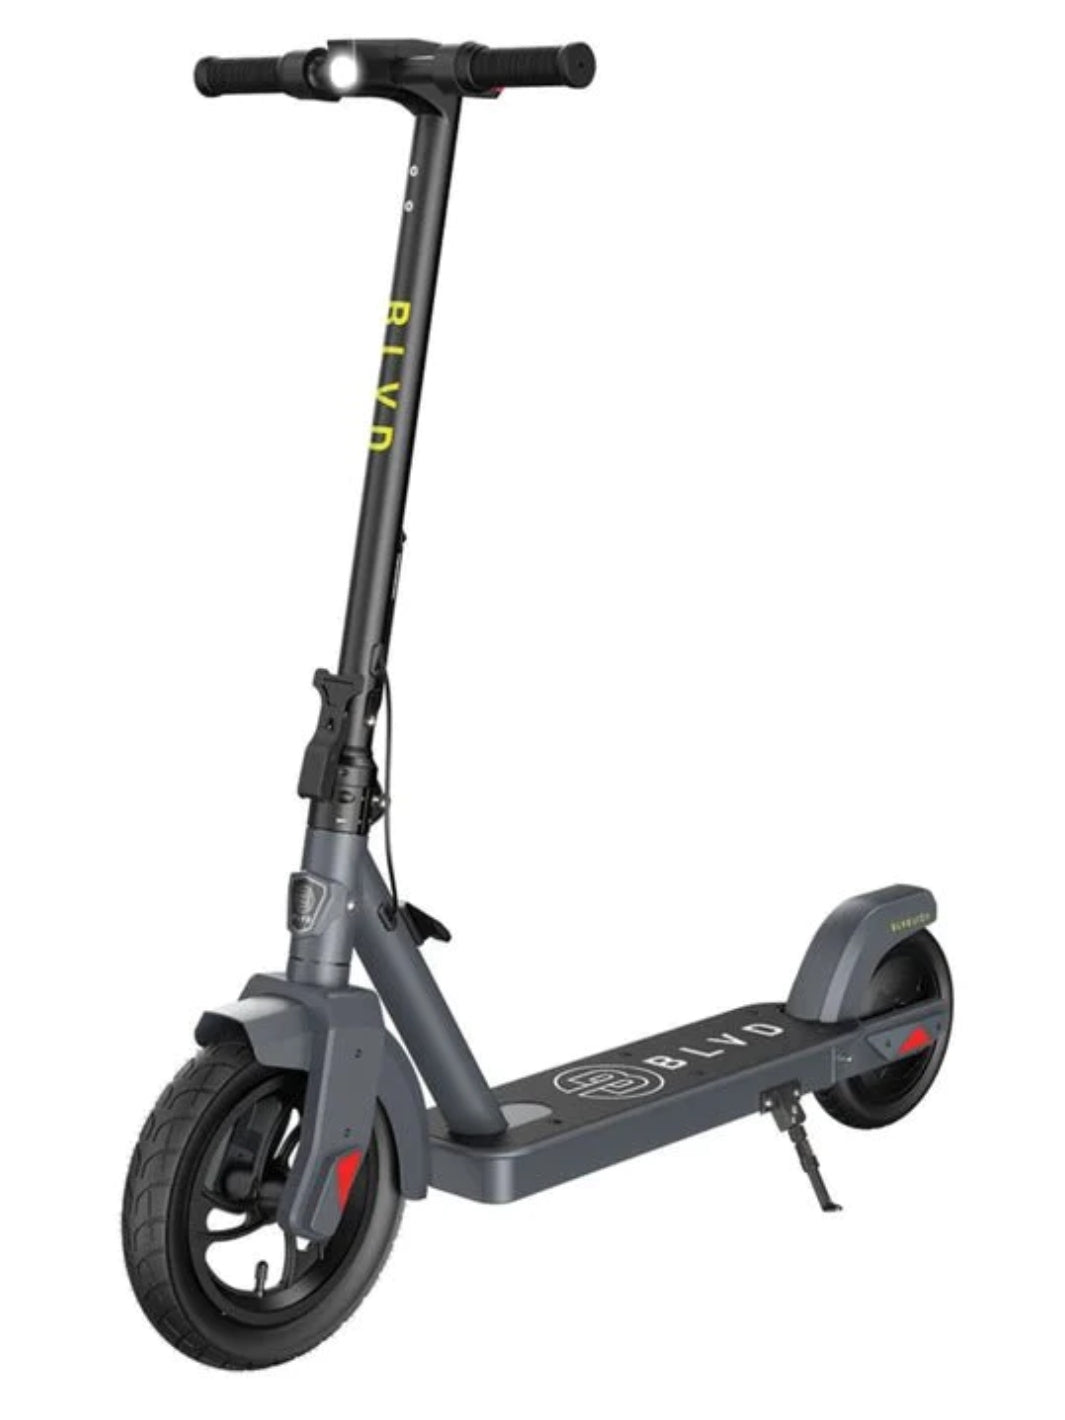 BLVD URBAN ELECTRIC SCOOTER